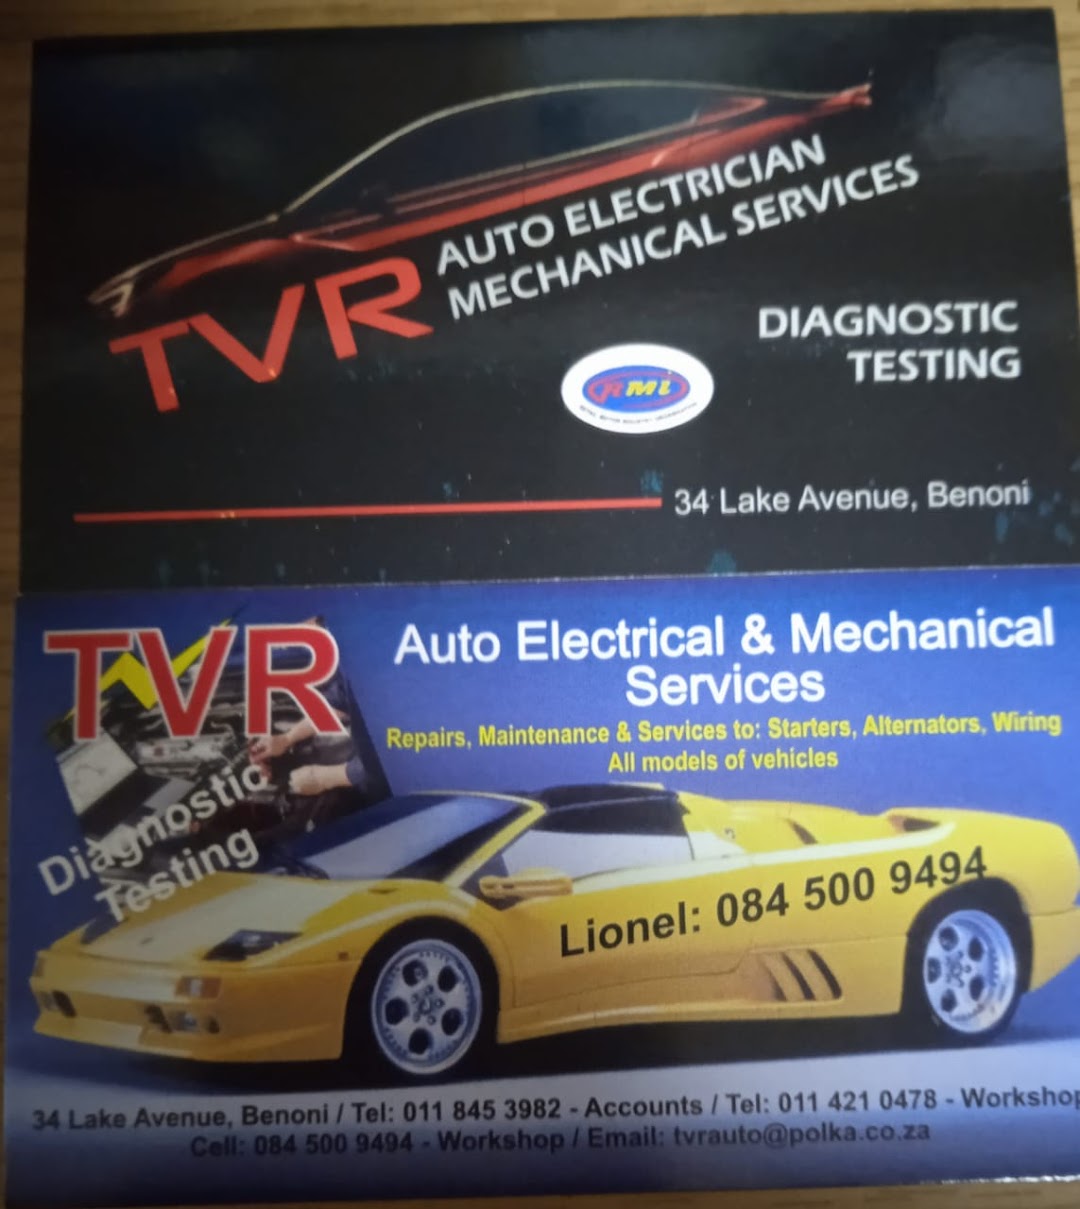 TVR Auto Electrical & Mechanical Services